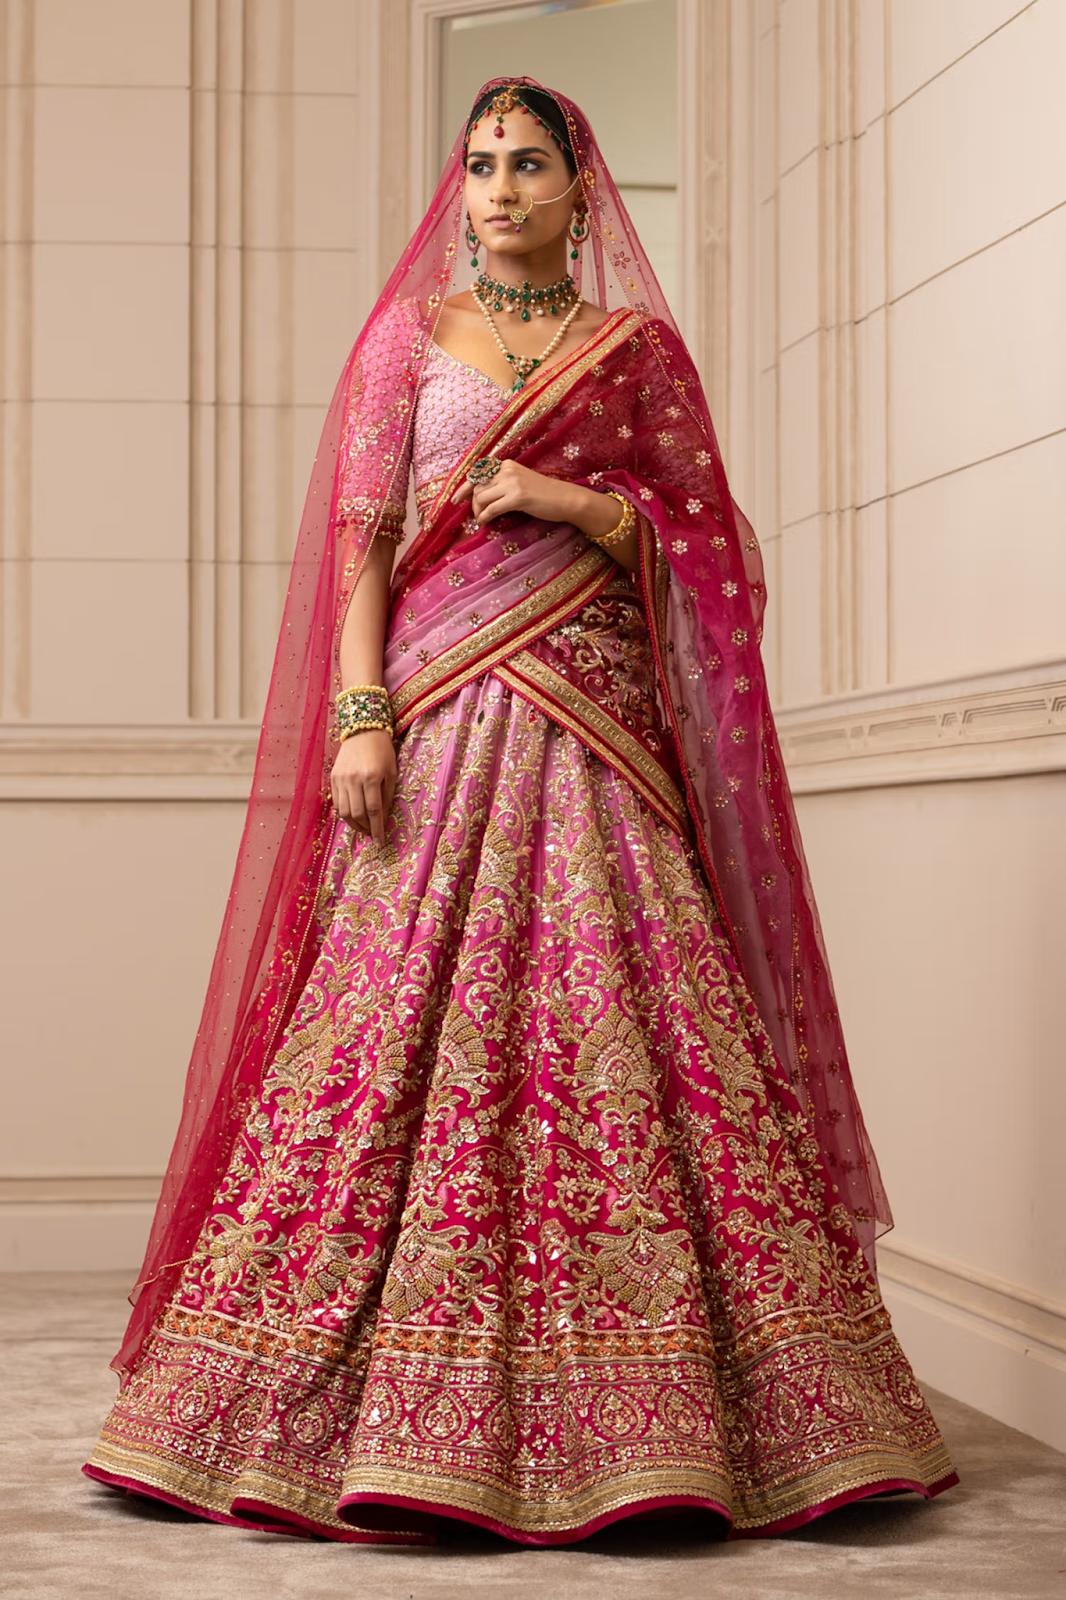 Aluna MakeUp Studio - This bride looks like a dream in this beauteous  pastel pink lehenga with contrasting green jewellery and hues of pink and  shimmer on the lid and glossy pink